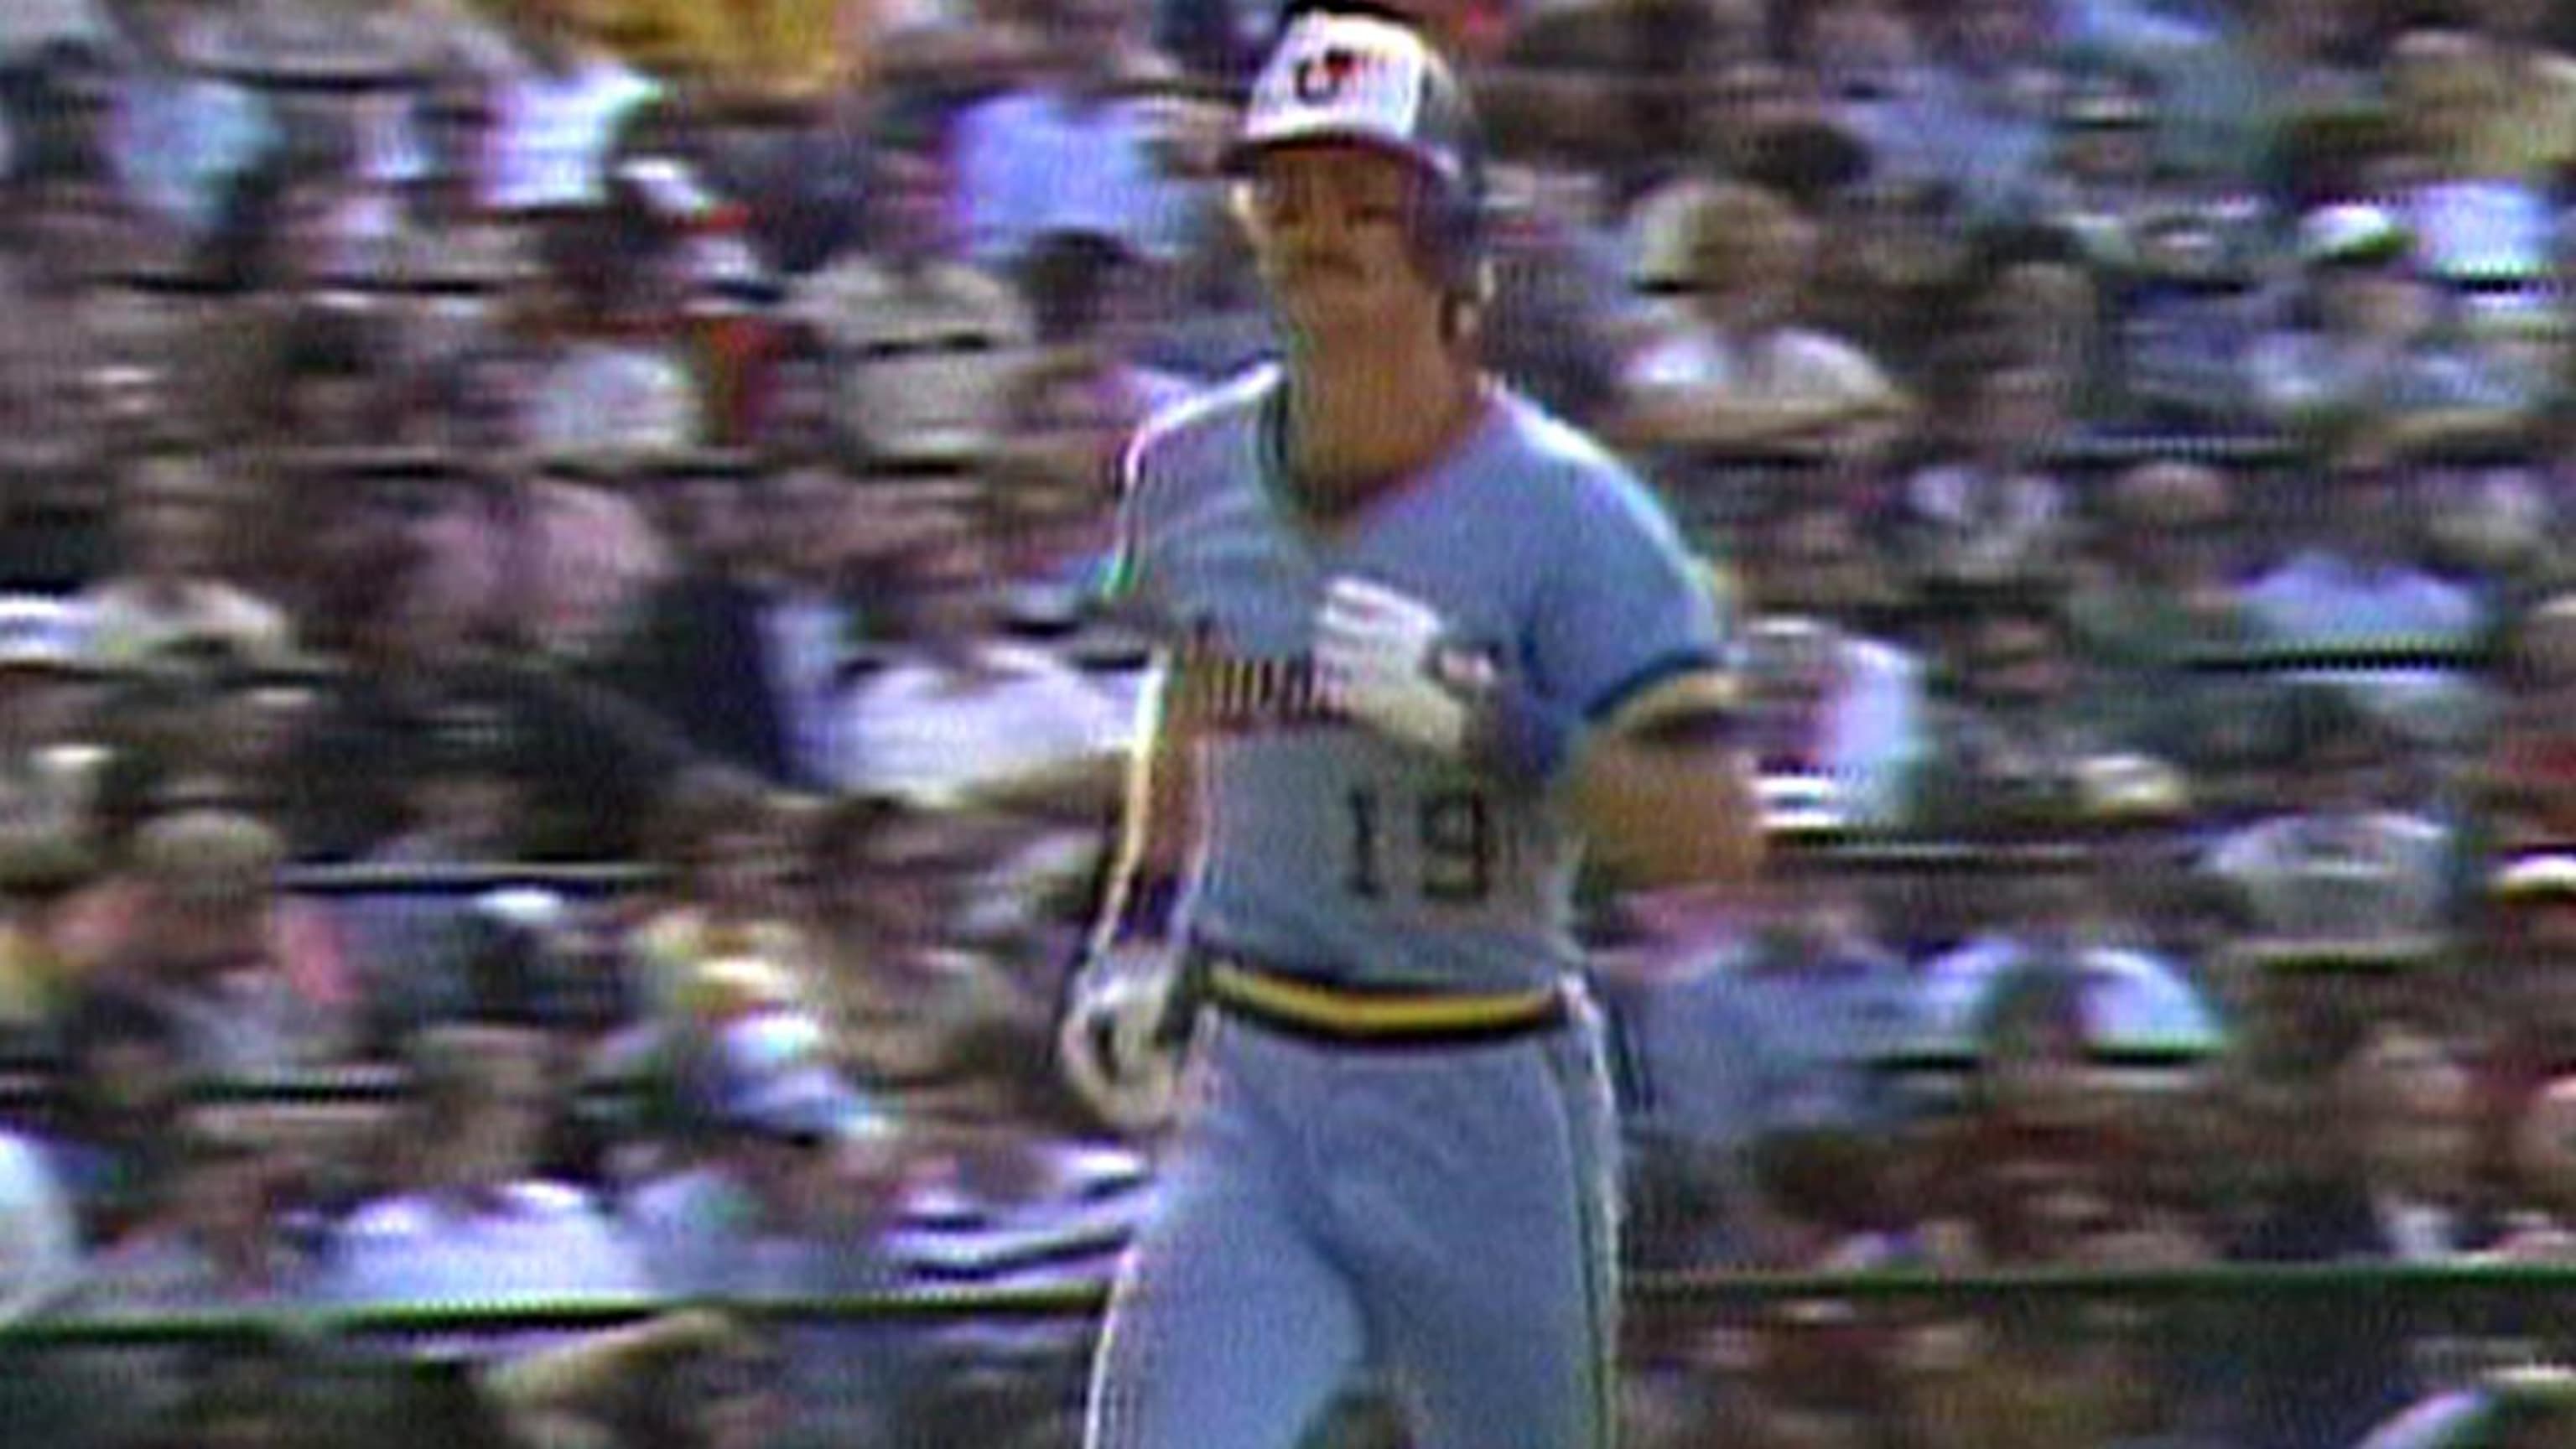 Robin Yount named AL Most Valuable Player